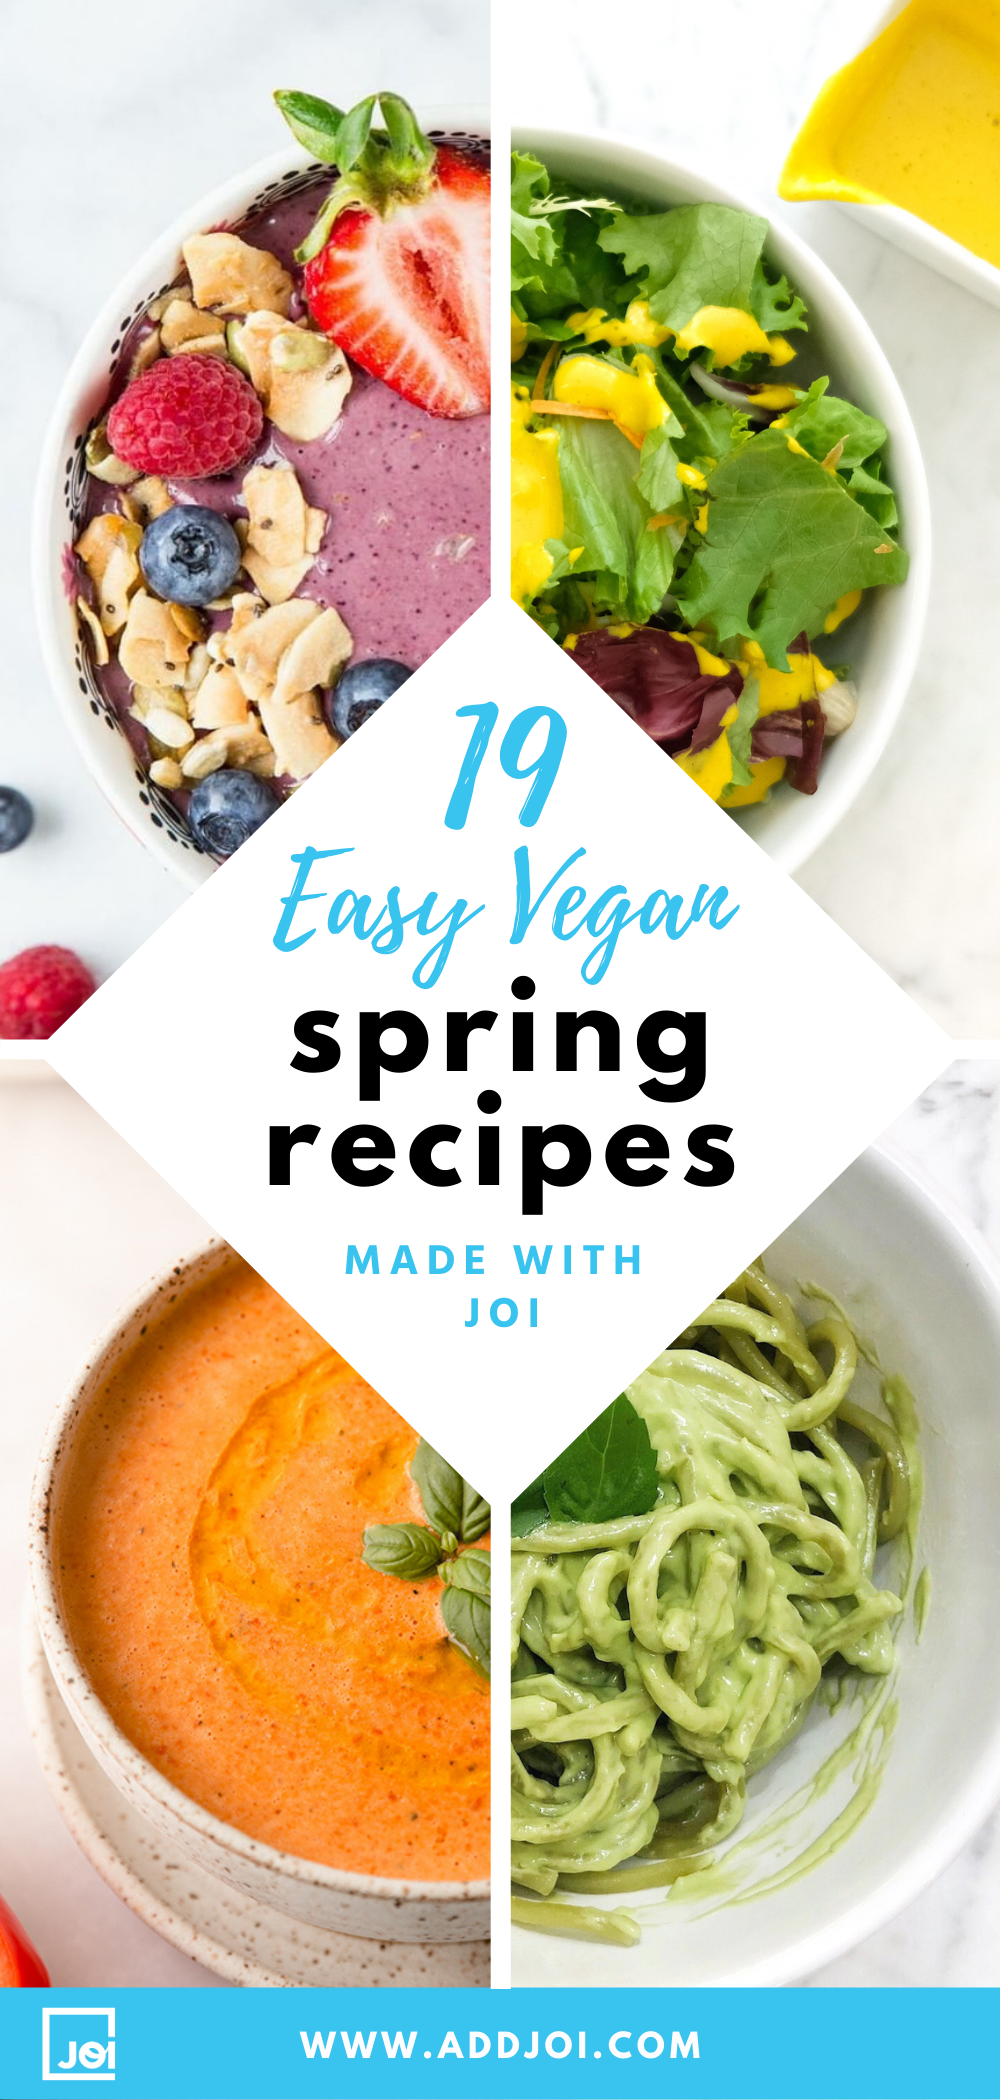 19 Vegan Easter & Spring Recipes Made with JOI for Healthier Eating All Day Long